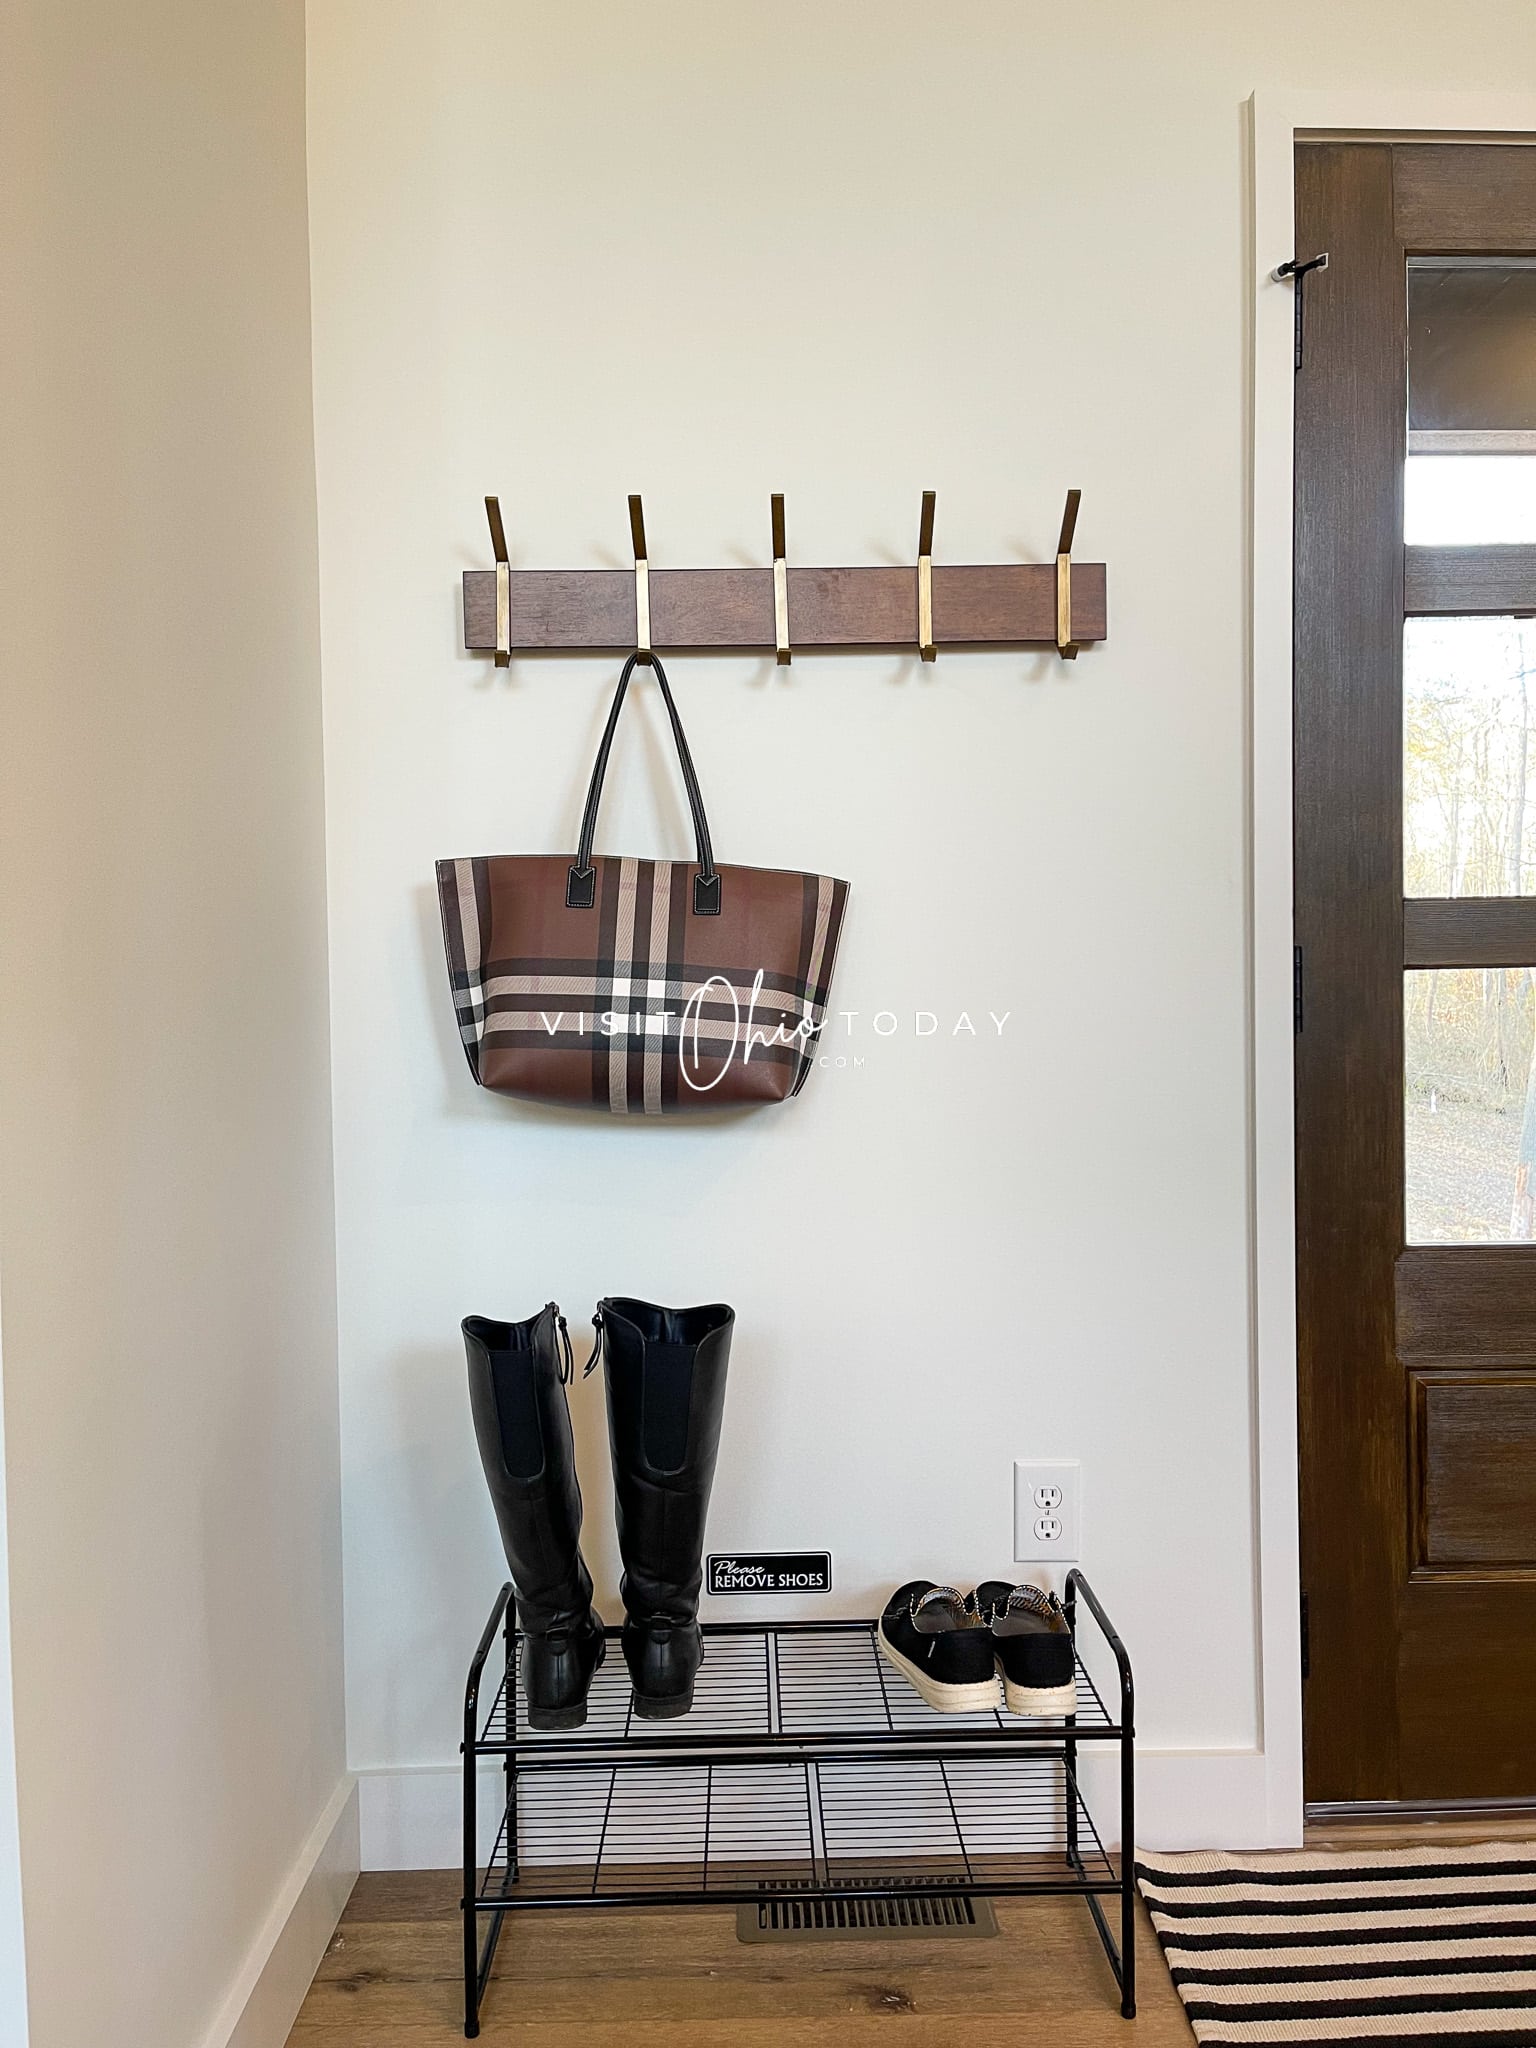 entry way of house with brown striped purse hanging on hook, boots and shoes on a shoe rack Photo credit: Cindy Gordon of VisitOhioToday.com